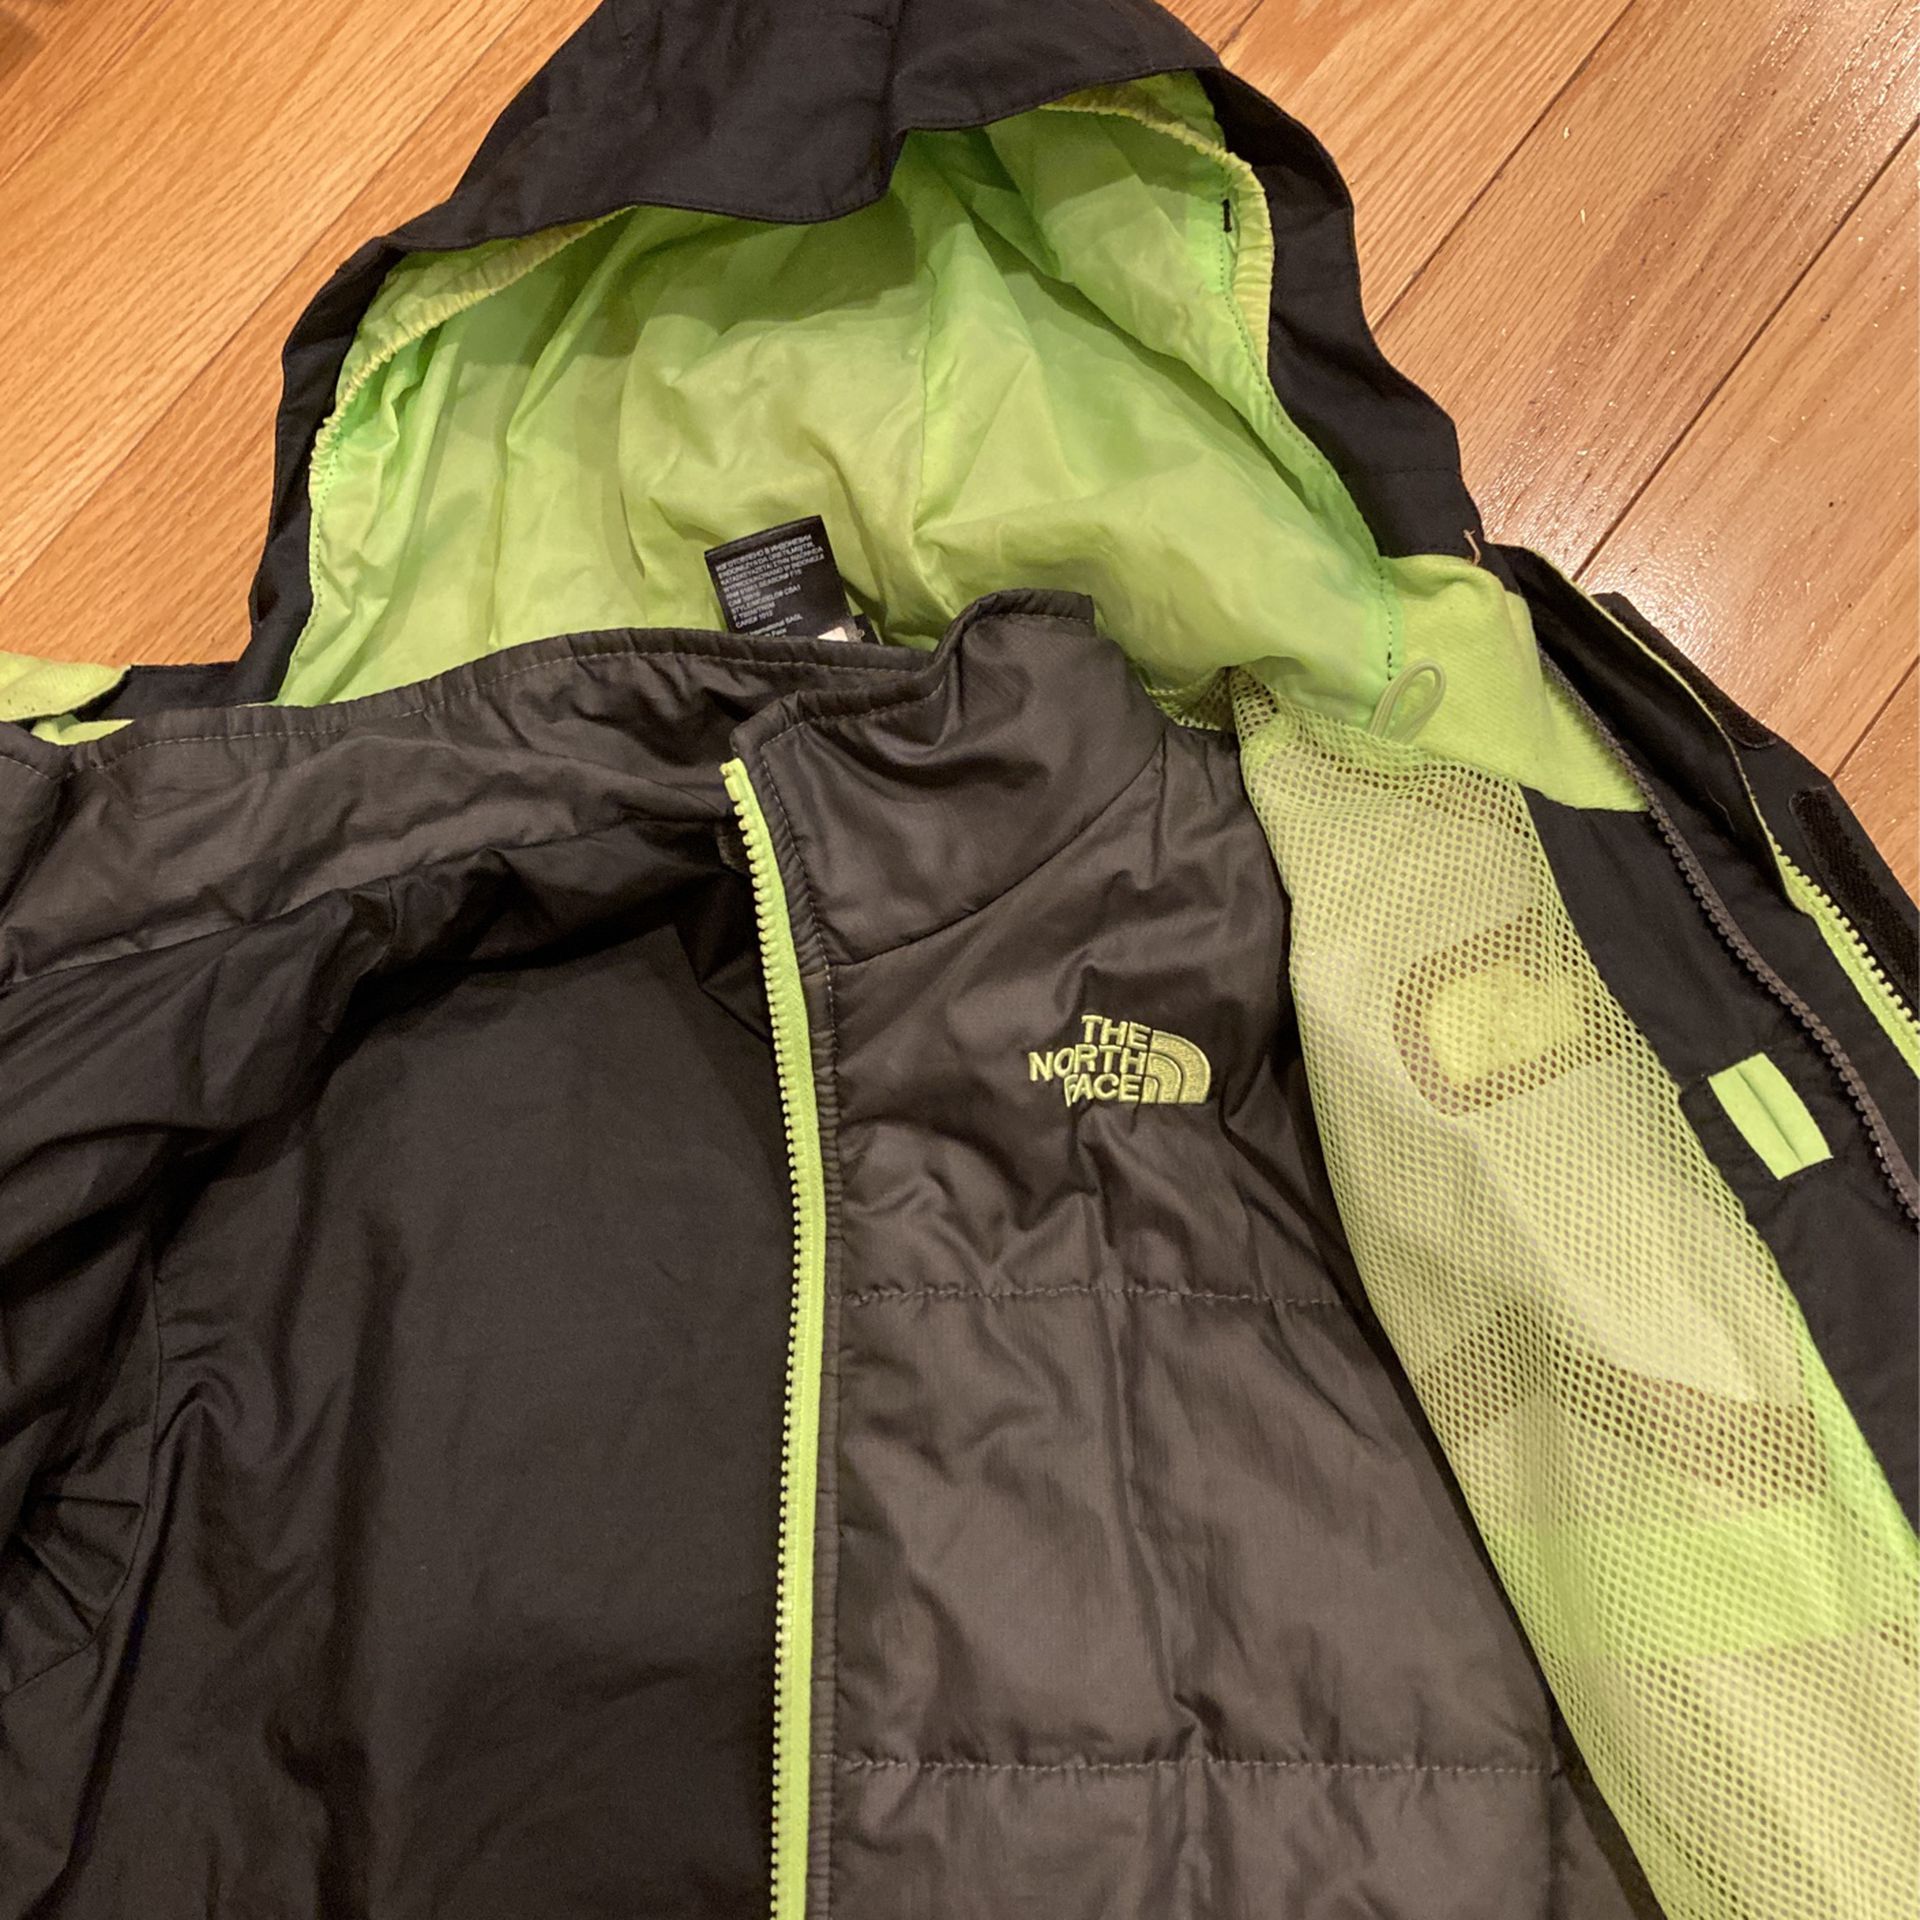 THE NORTH FACE PARKA 3in1 BOYS s 10/12